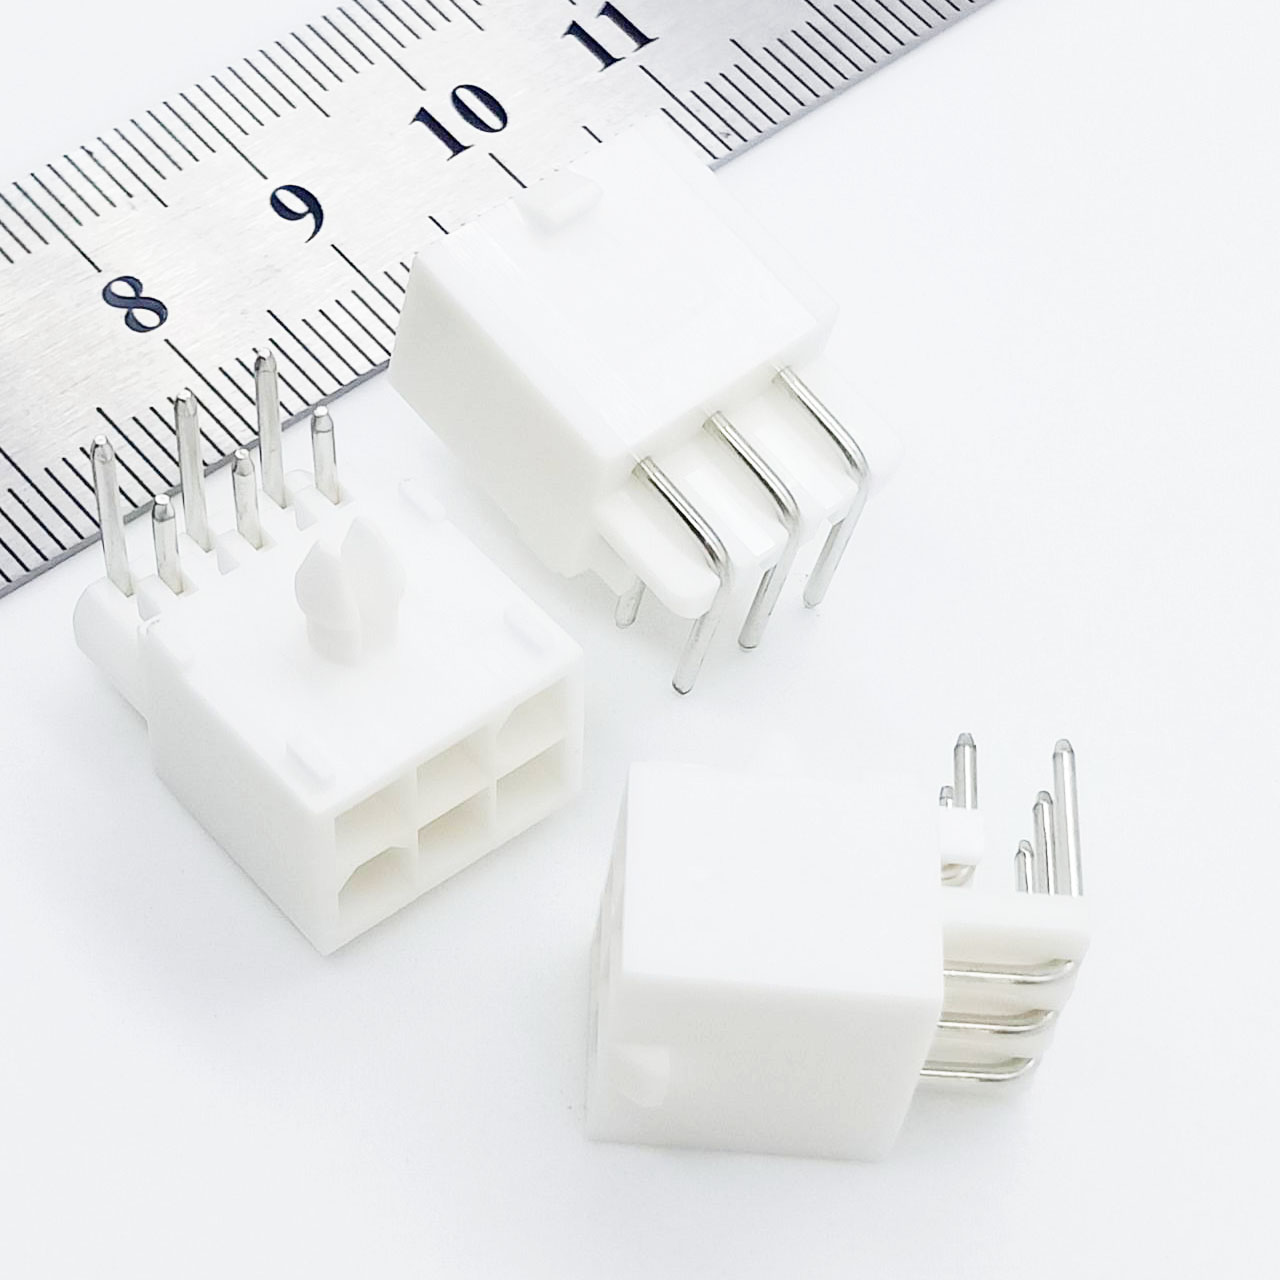 770969-2 connectors stand as a testament to innovation and reliability in the world of connectivity.